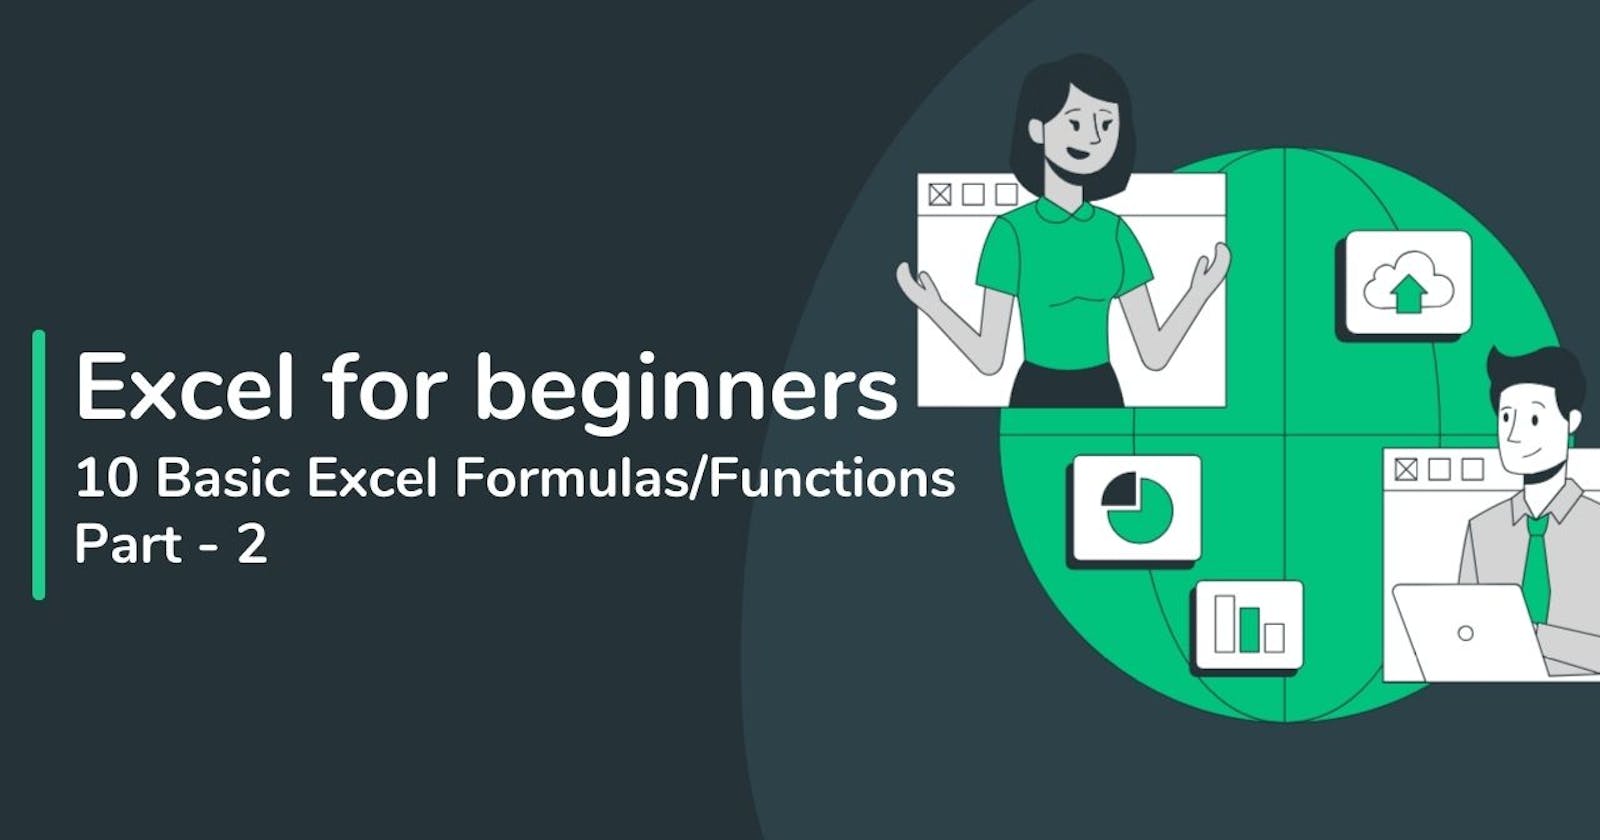 Excel for beginners: 10 Basic Excel Formulas/Functions | Part -2